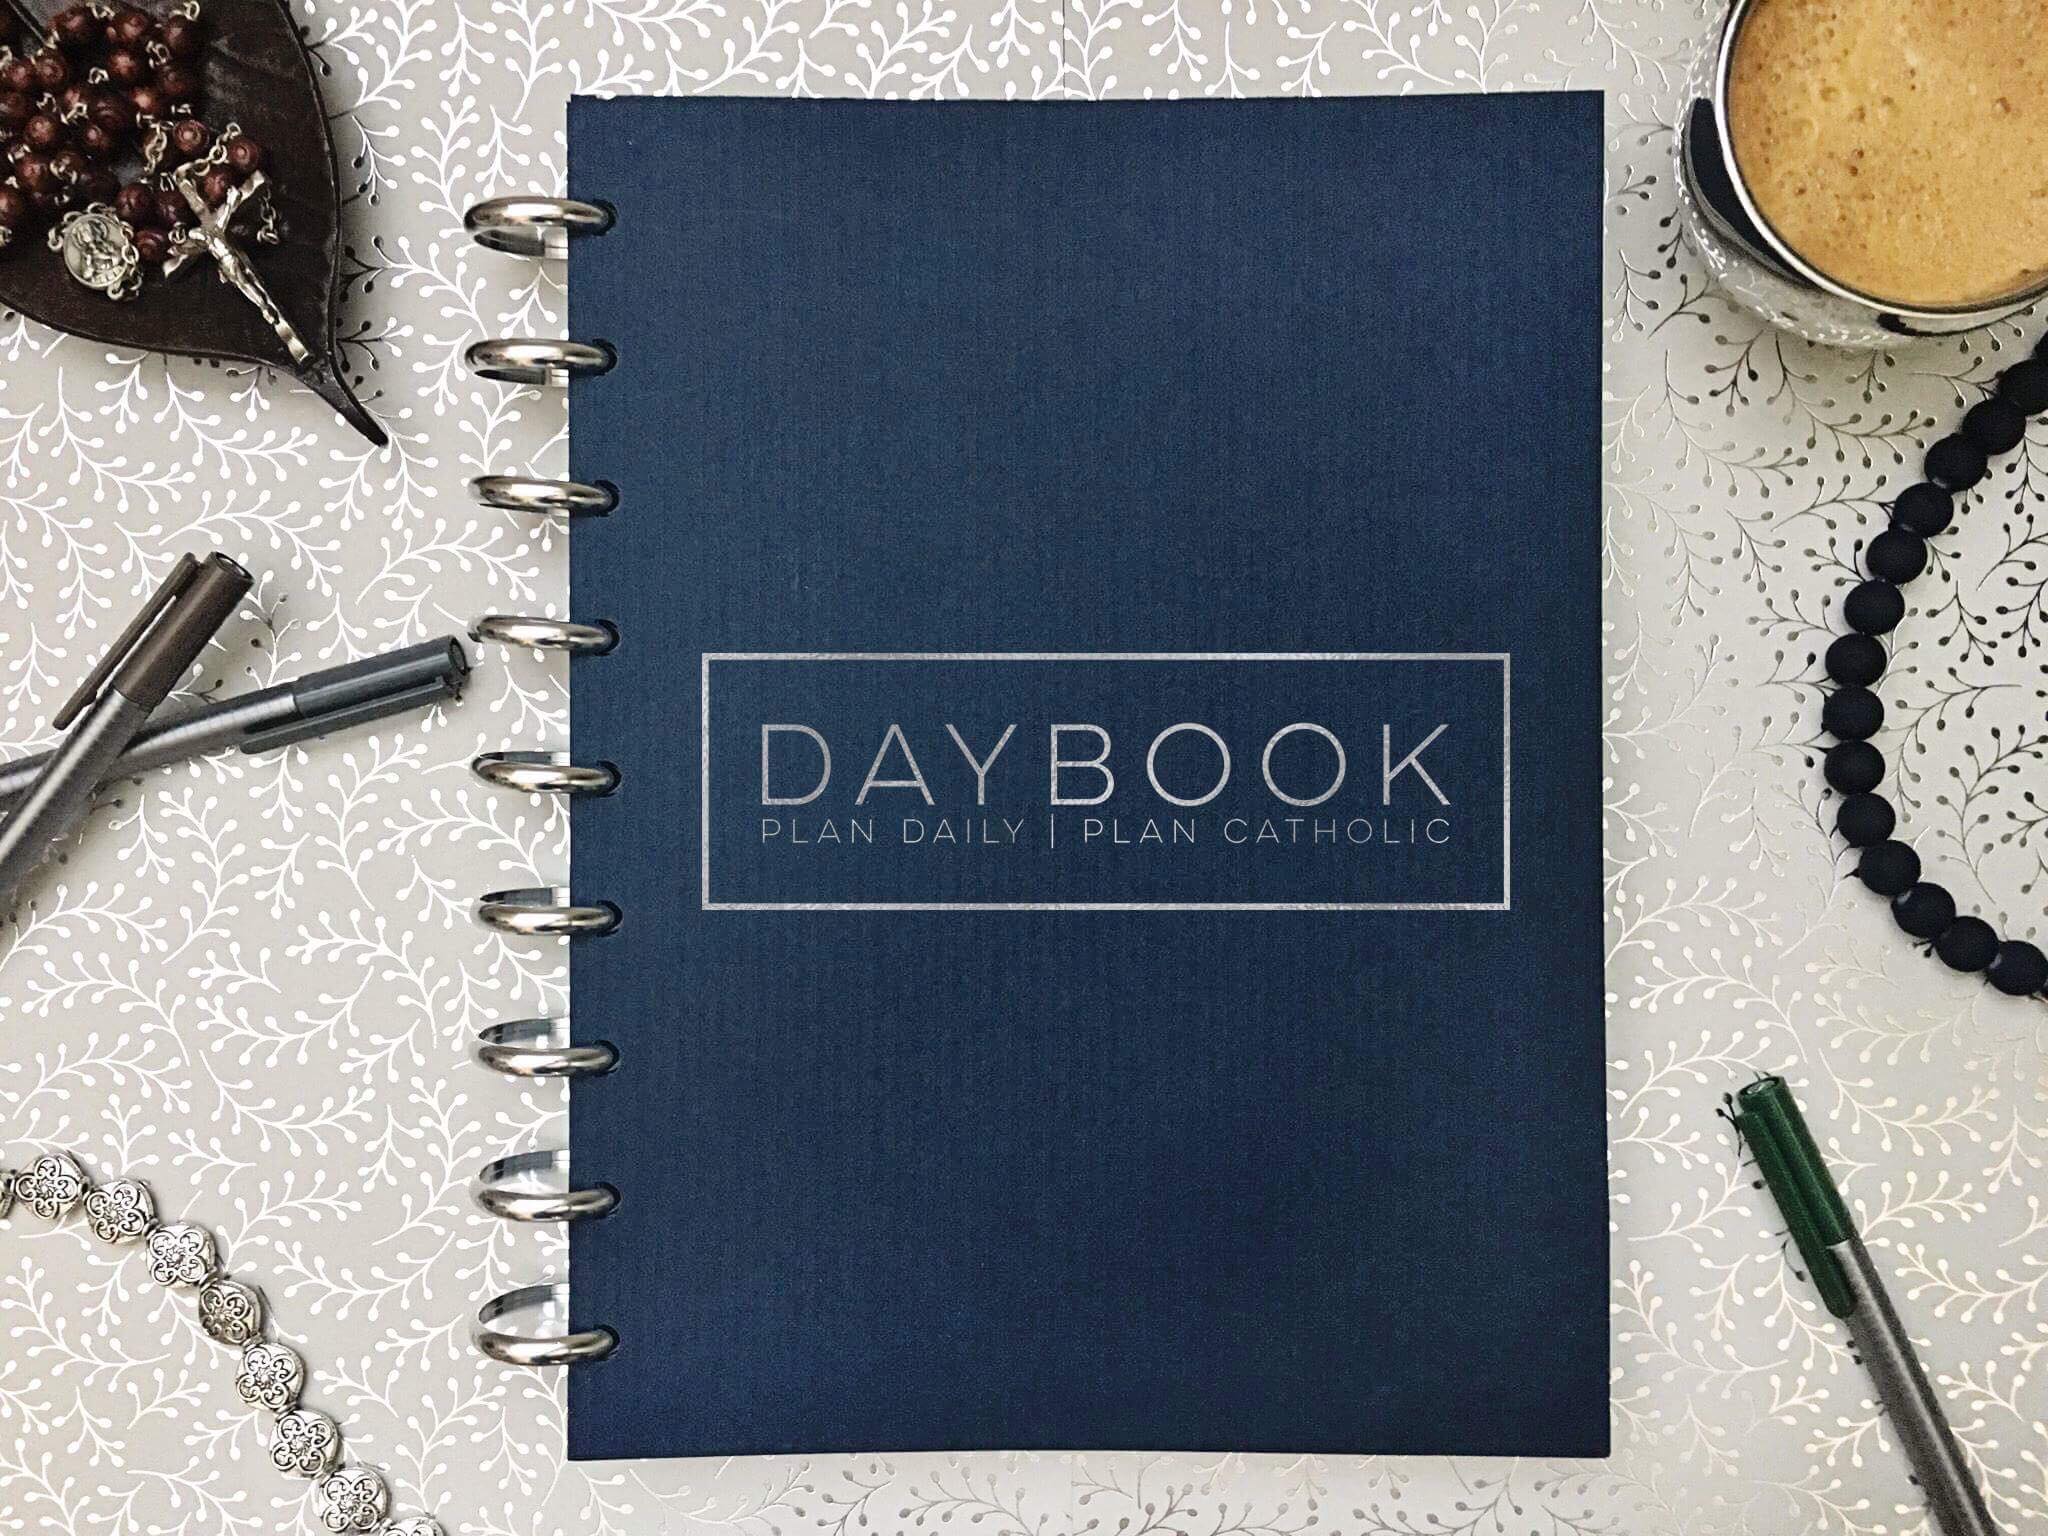 Why DAYBOOK Should be Your Catholic Planner